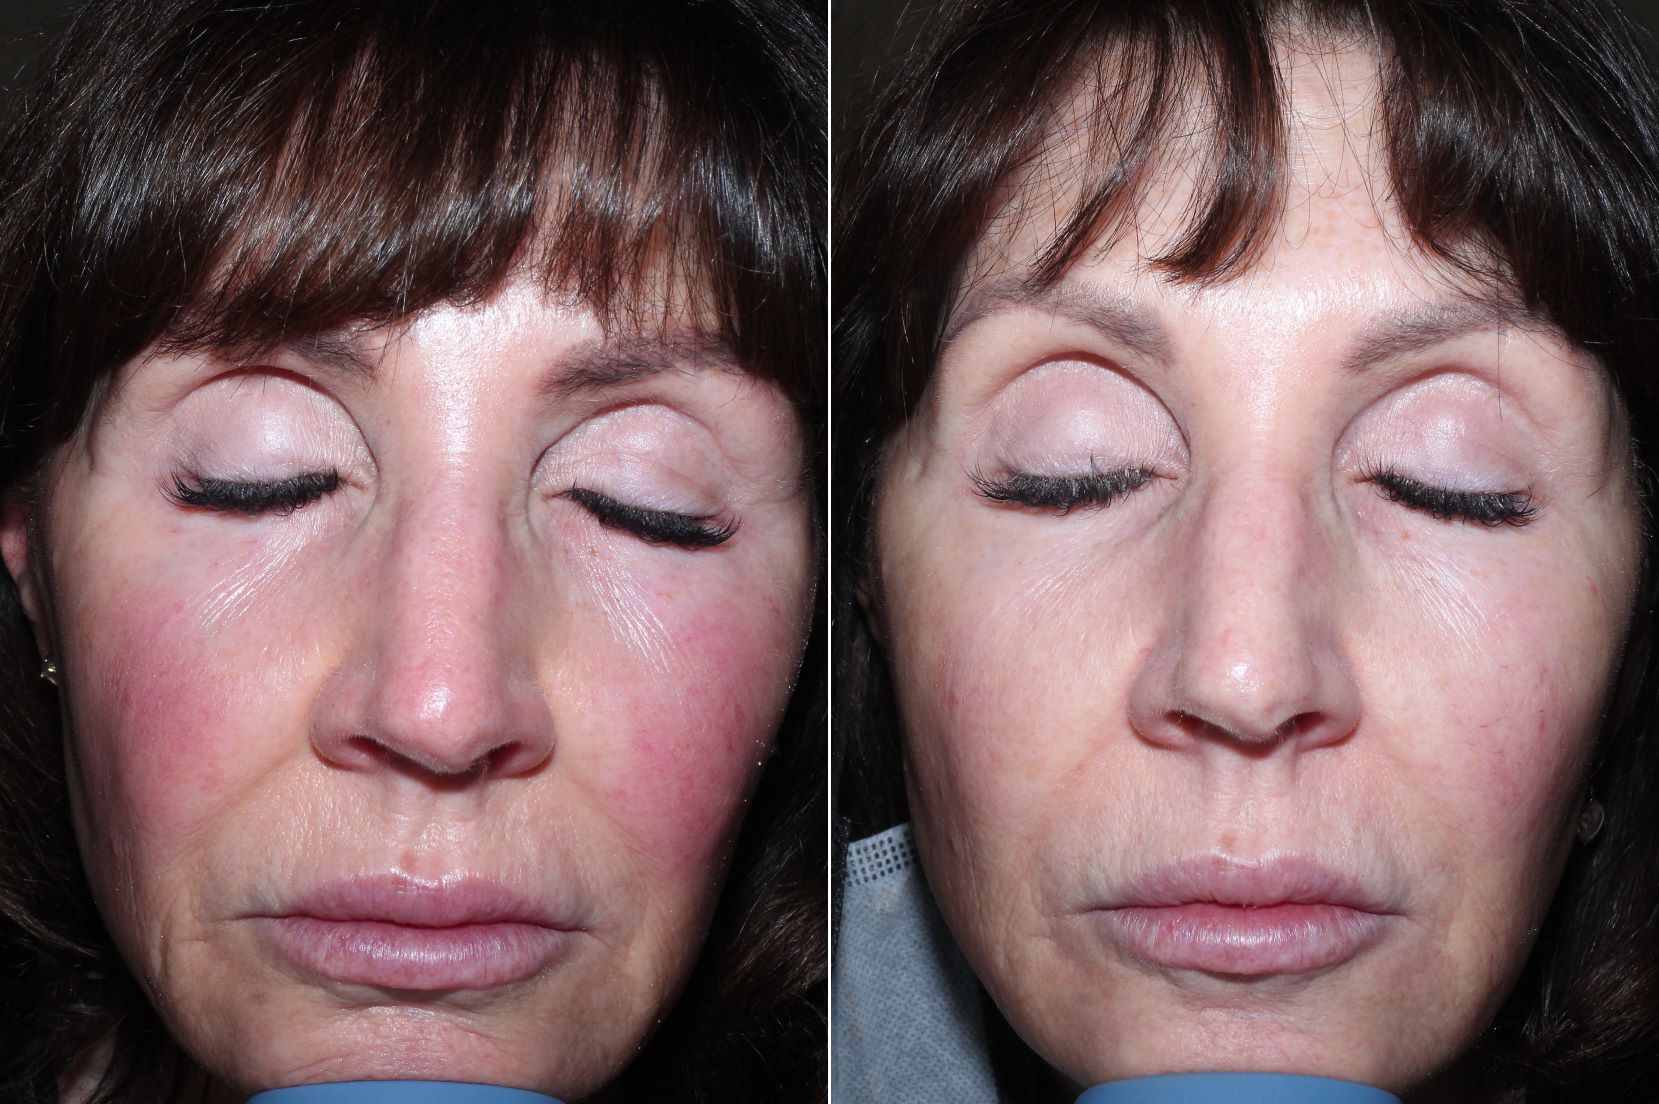 Before and after photos of woman who used exosomes to reduce redness and rejuvenate her skin